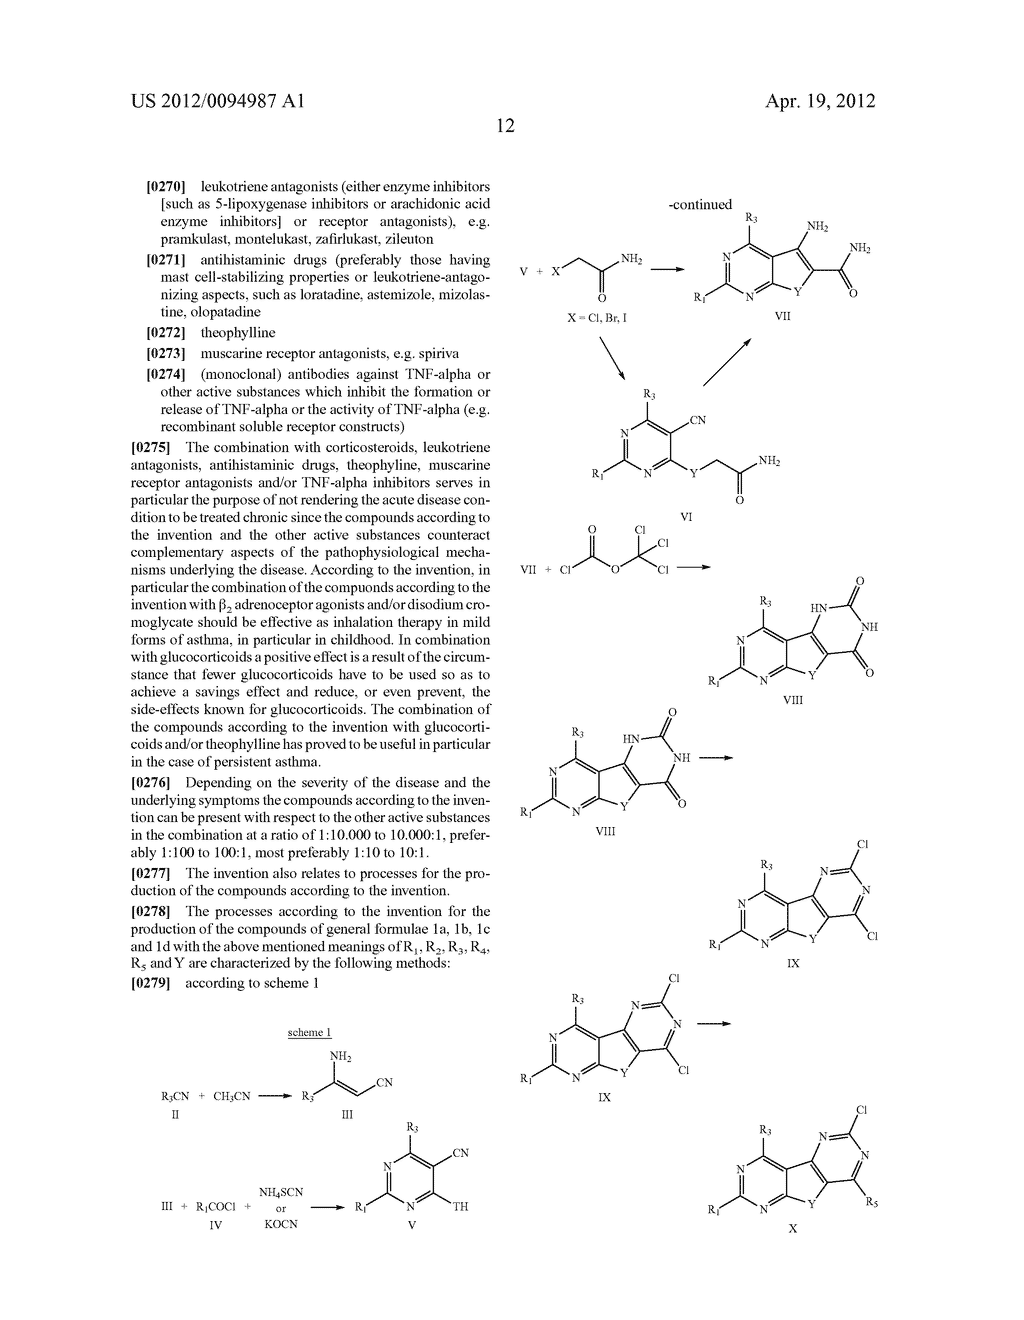 SUBSTITUTED PYRIDO [3', 2': 4, 5] THIENO [3, 2-D] PYRIMIDINES AND PYRIDO     [3', 2': 4, 5] FURO [3, 2-D] PYRIMIDINES USED AS INHIBITORS OF THE PDE-4     AND/OR THE RELEASE OF TNF-alpha - diagram, schematic, and image 14